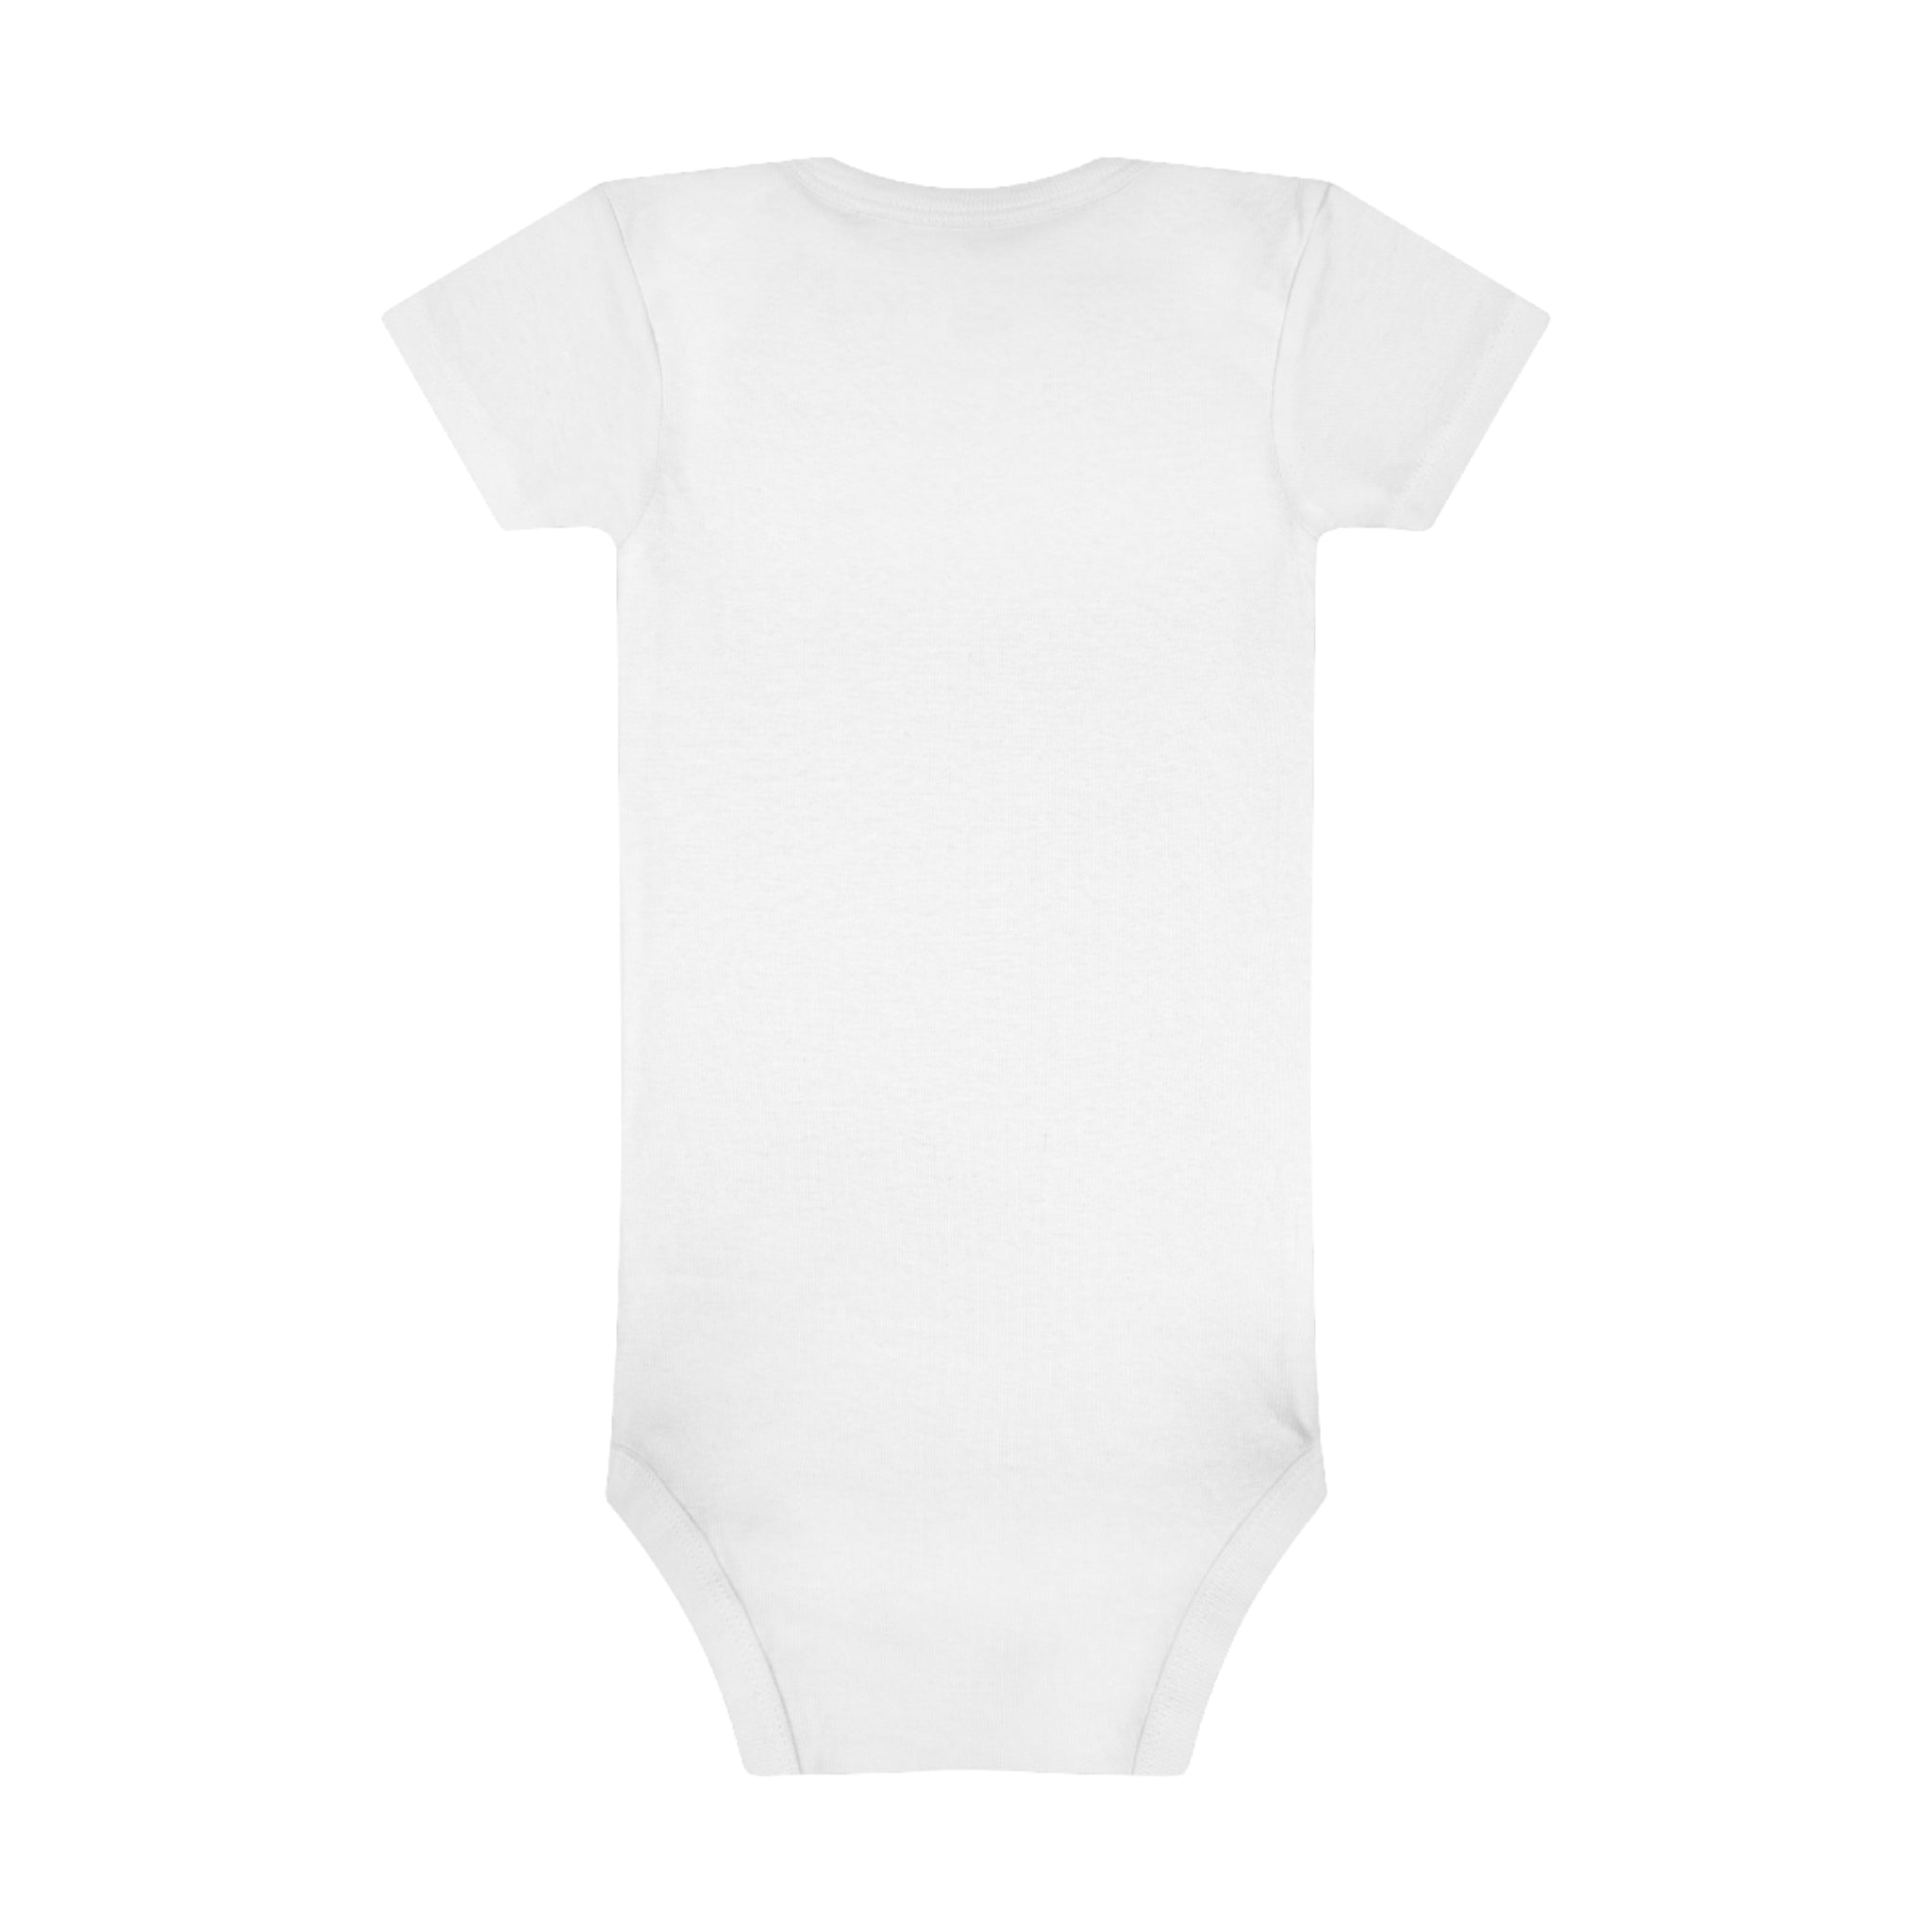 Baby Horse Infant Rip Snap Tee